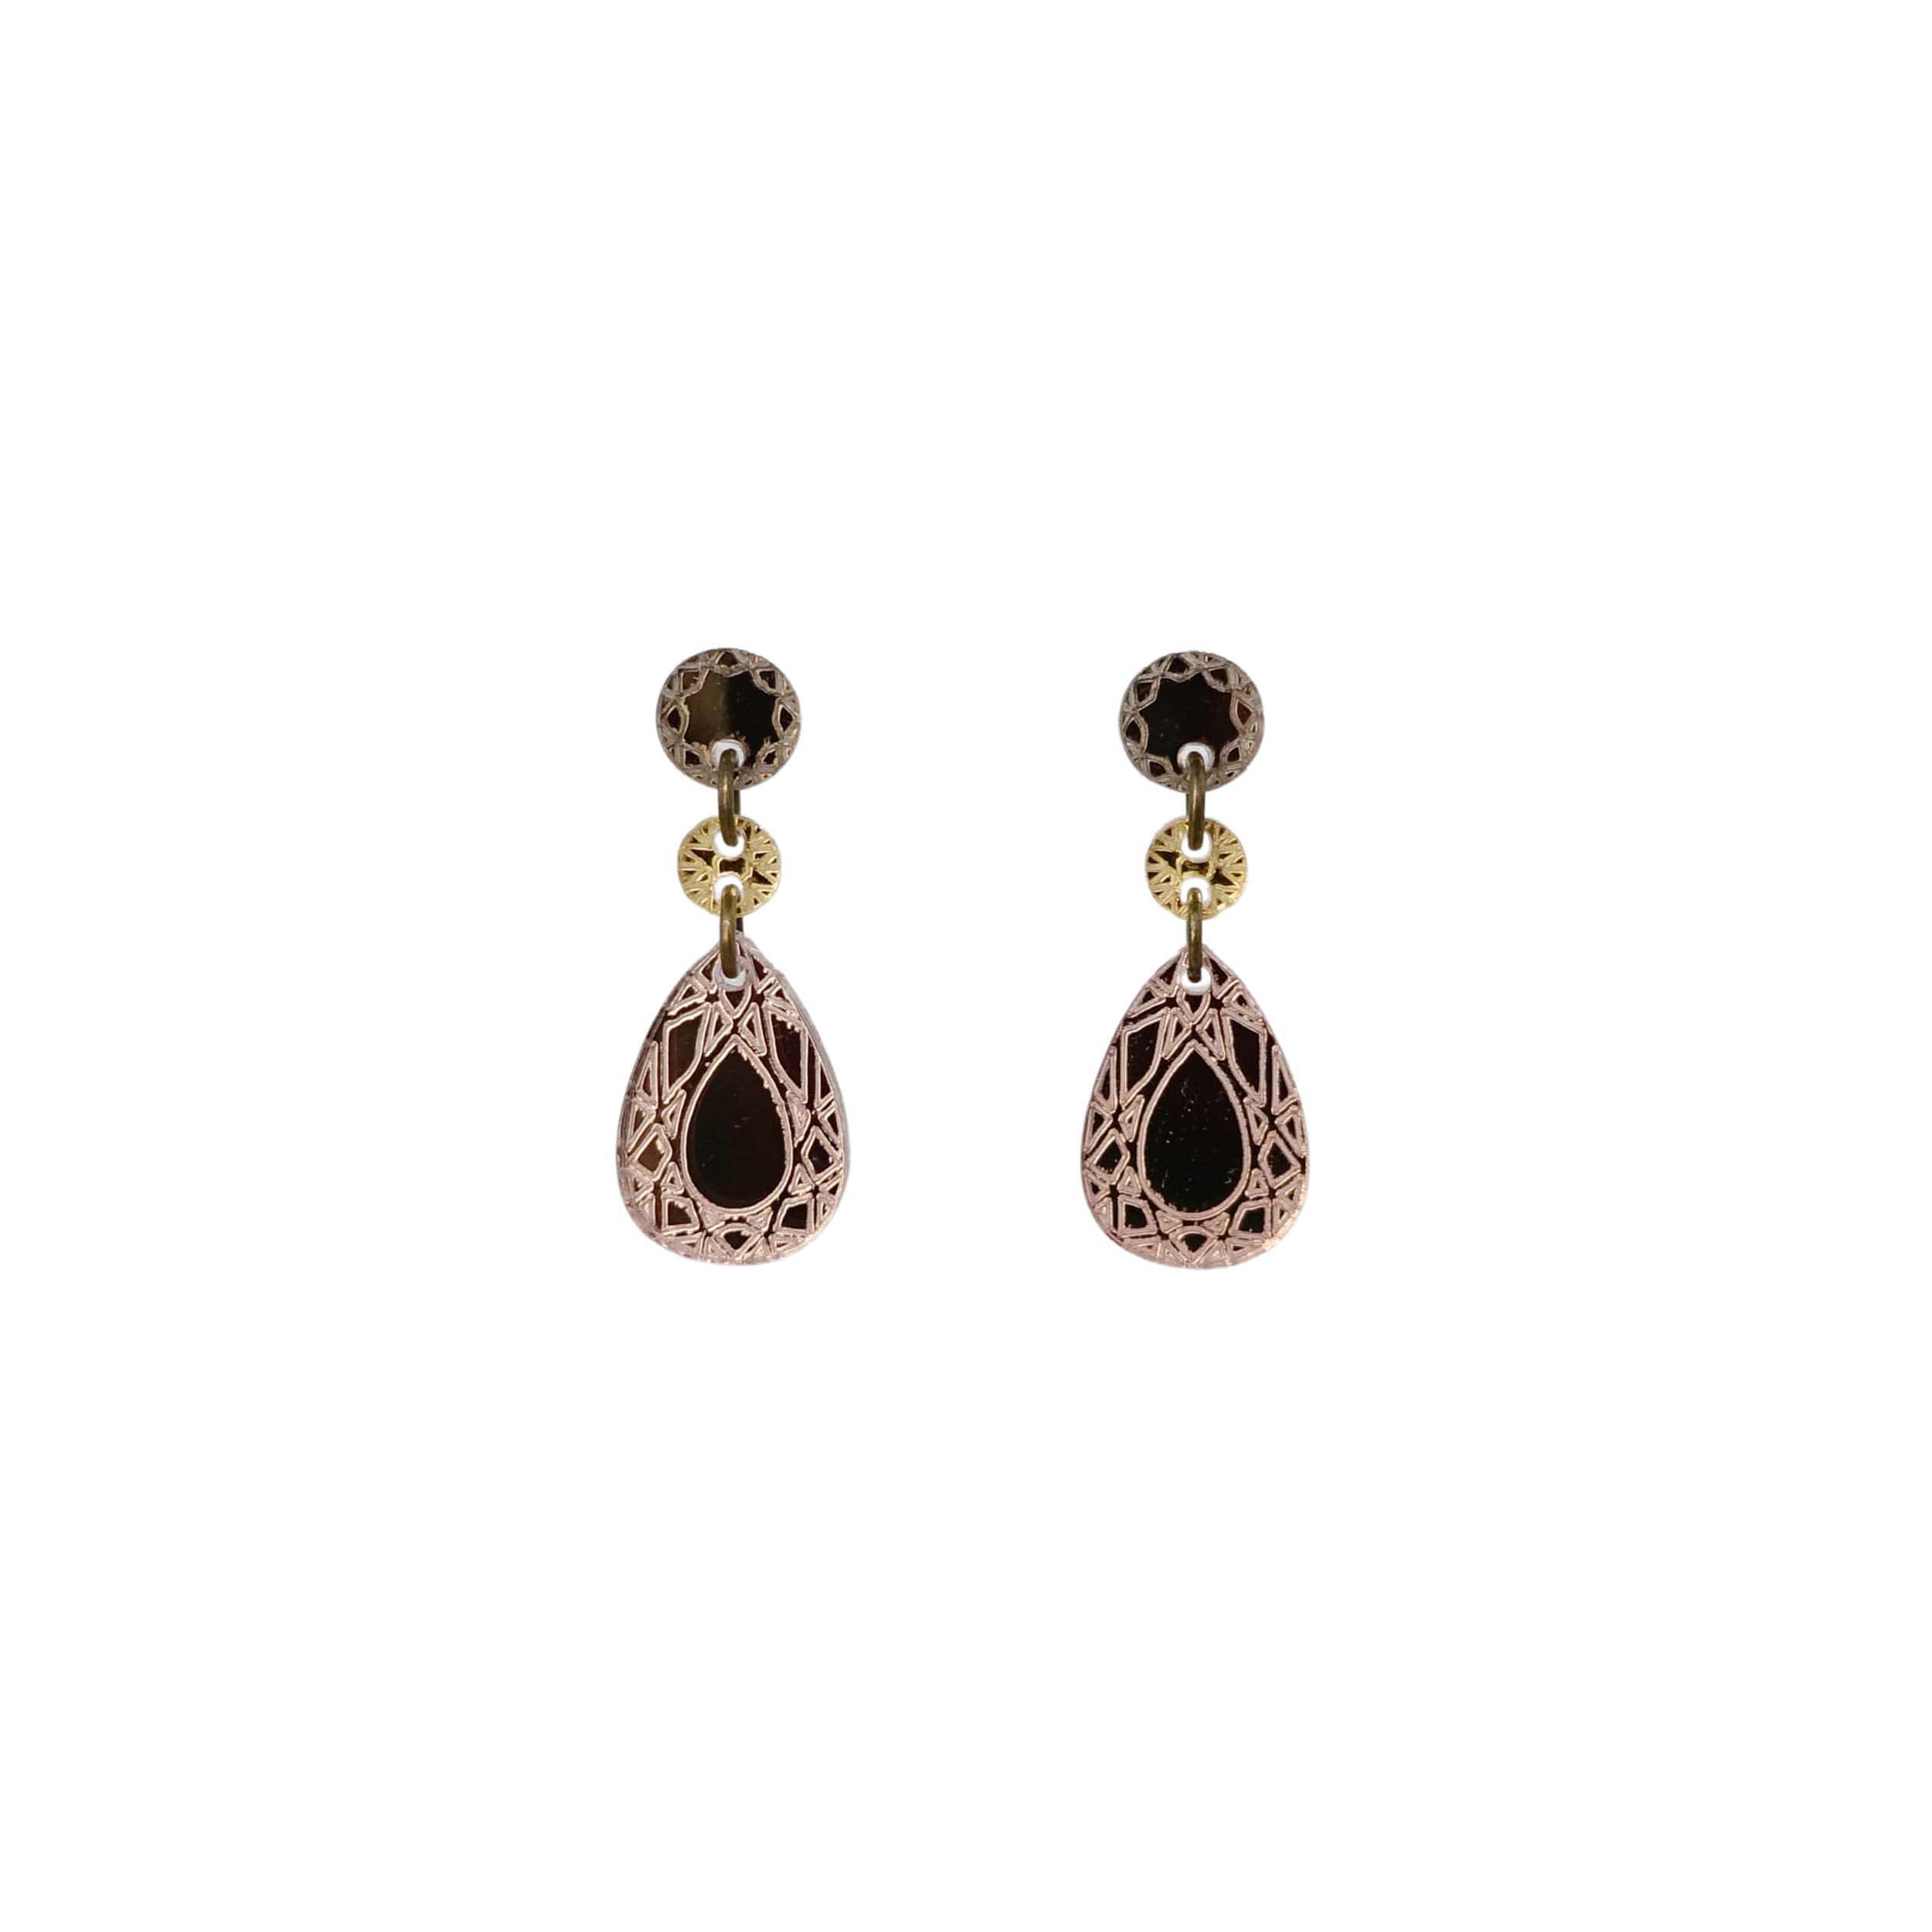 Belle Époque french drop earrings in rose gold mirror. These earrings are part of the Austerity Jewels Paris-inspired collection designed by Sarah Day for Wear and Resist. 